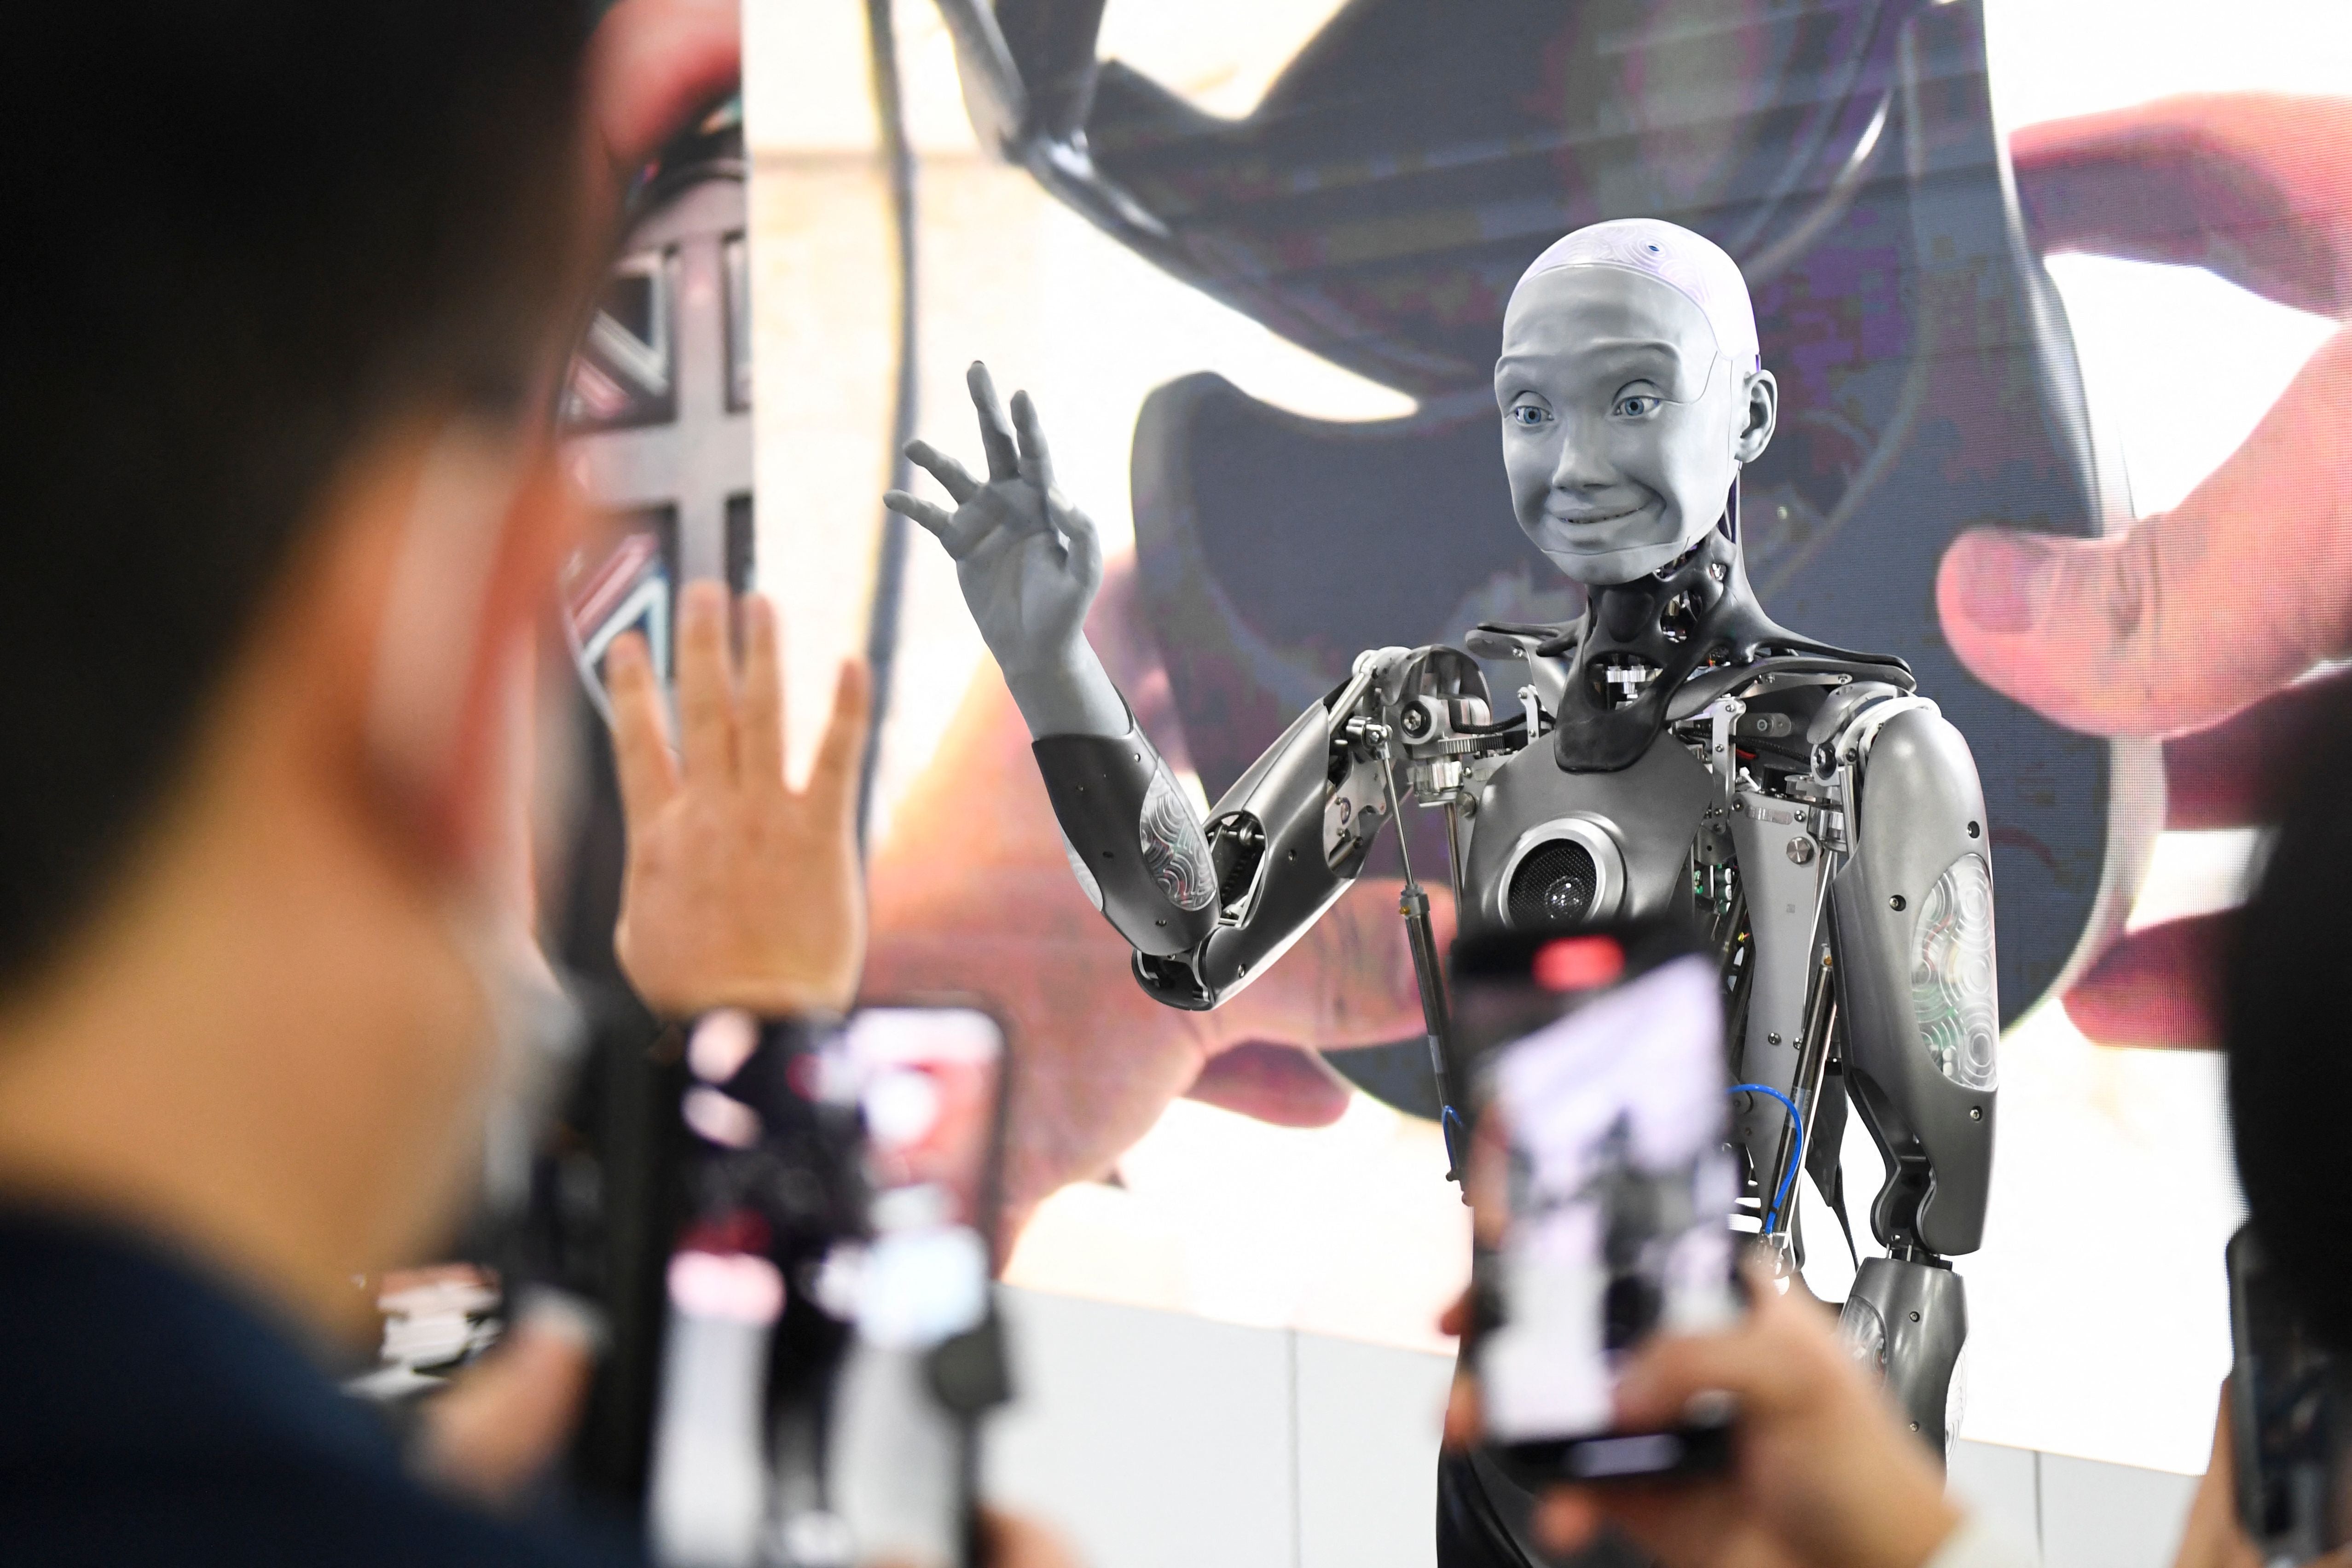 Meet Ameca, one of the most advanced human-like robots in the world